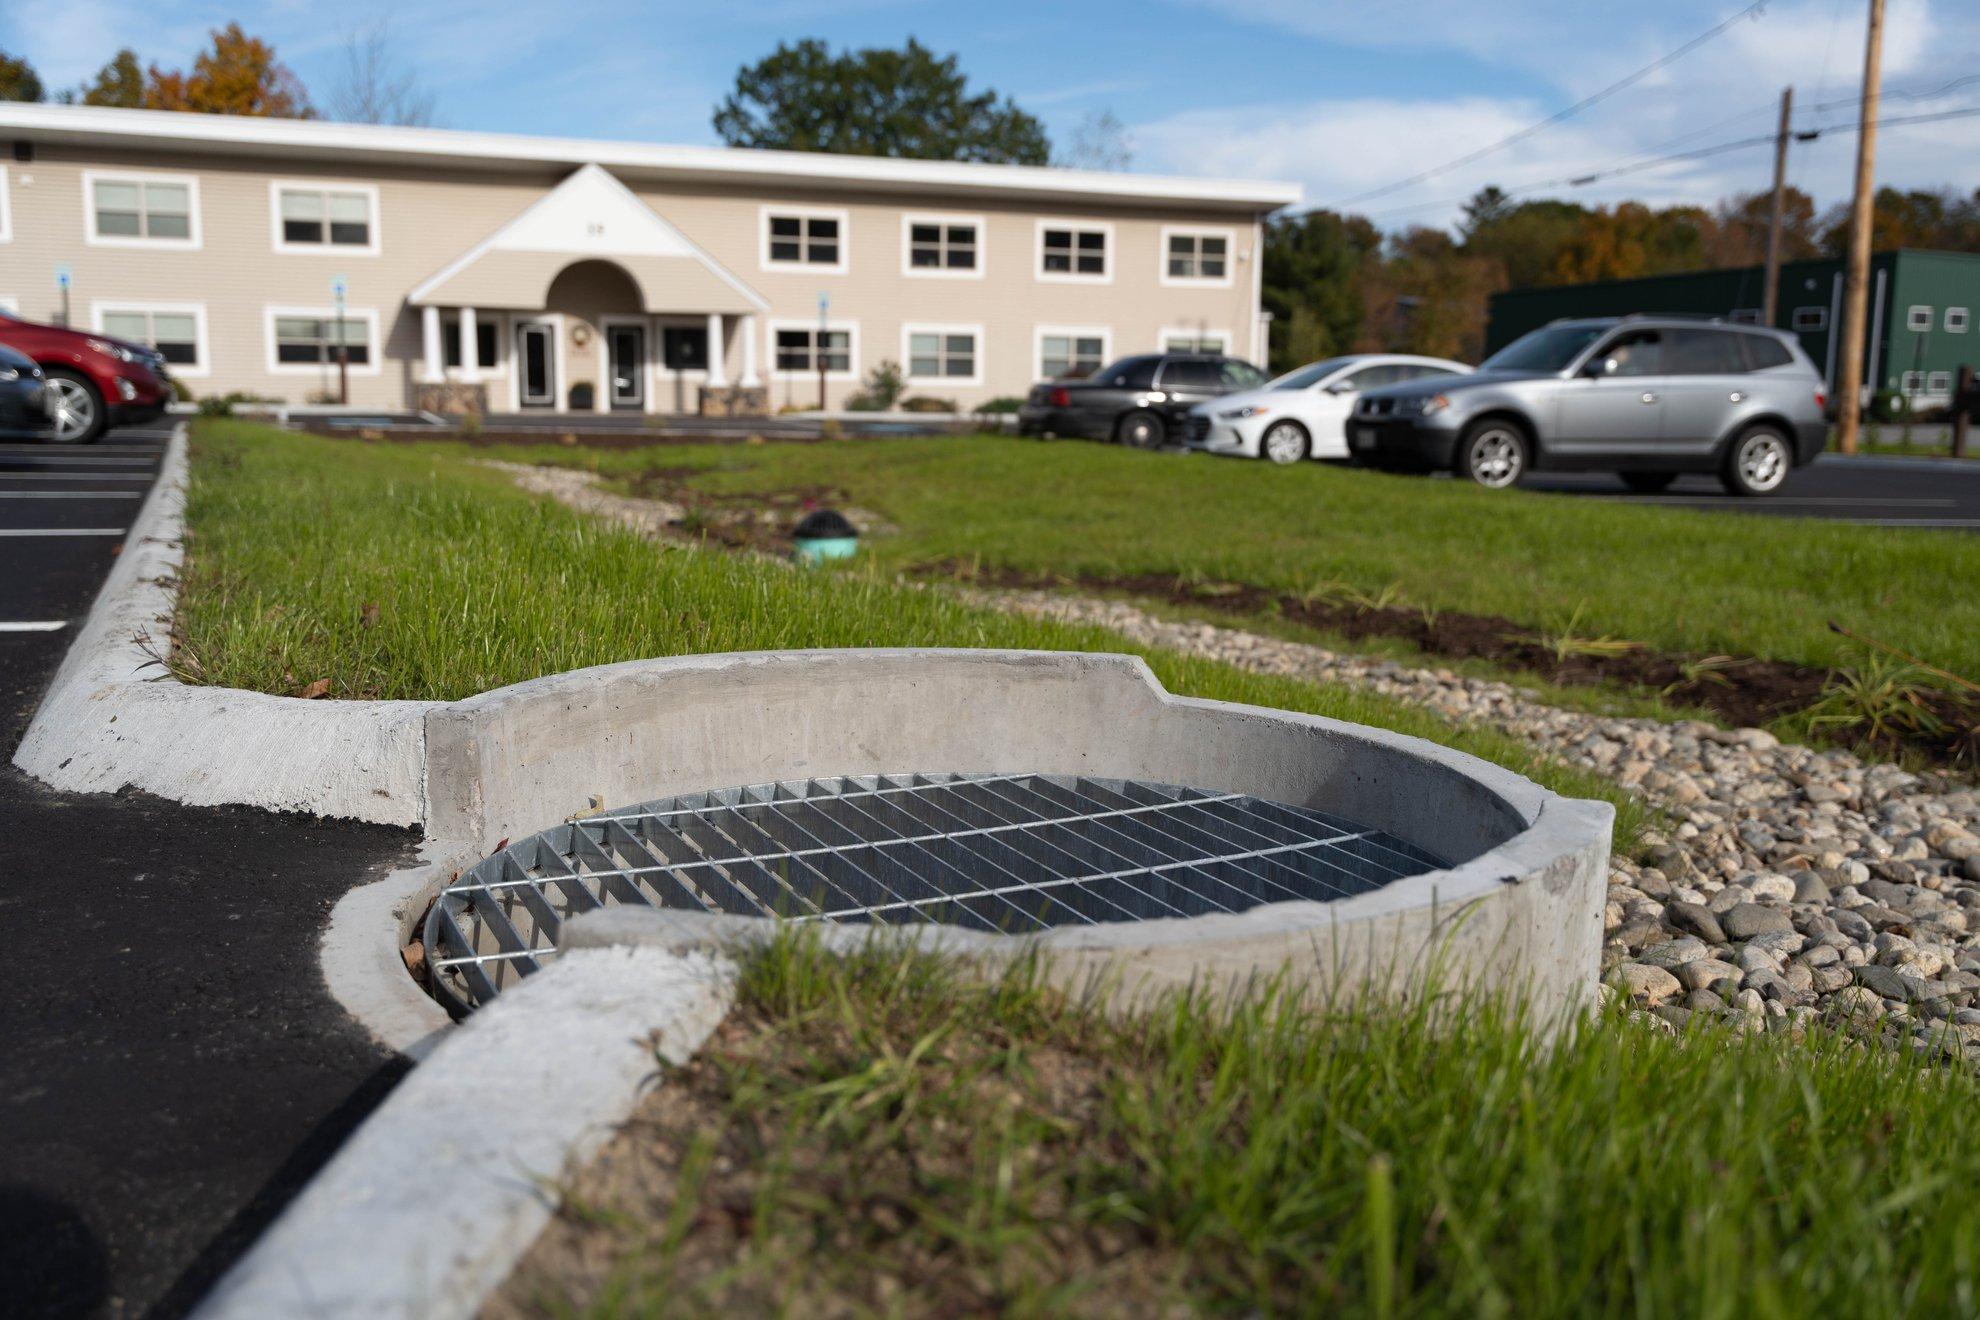 Drainage grid on a sewer tank in a grassy area, with a parking lot and office complex in the background.